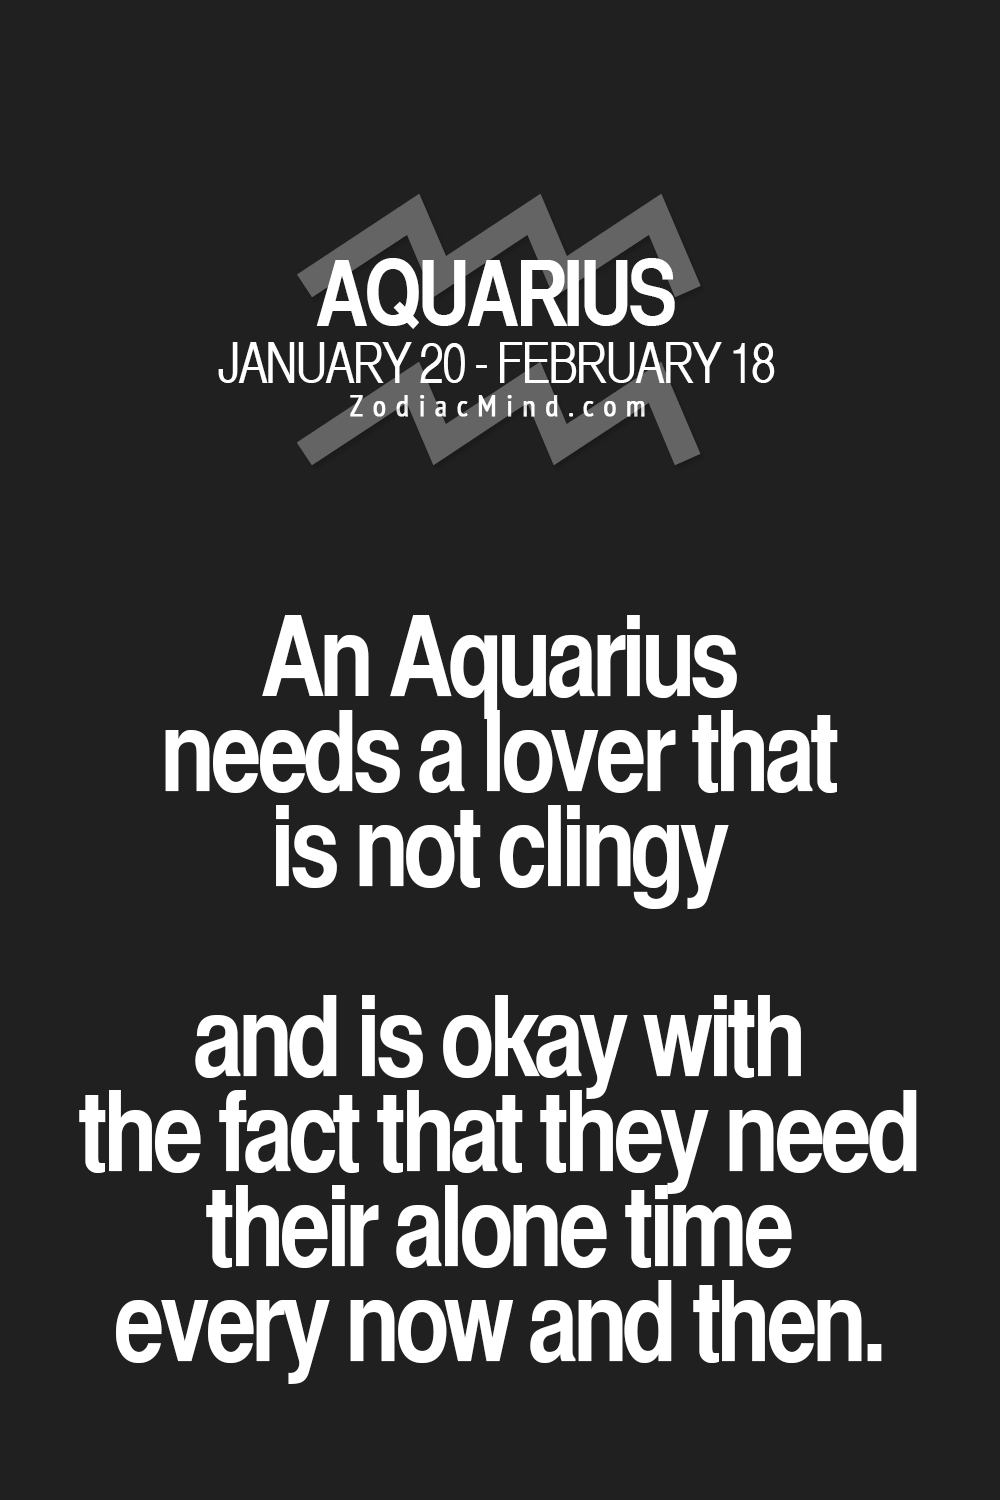 zodiacmind: “ Fun facts about your sign here ” - Zodiac Memes